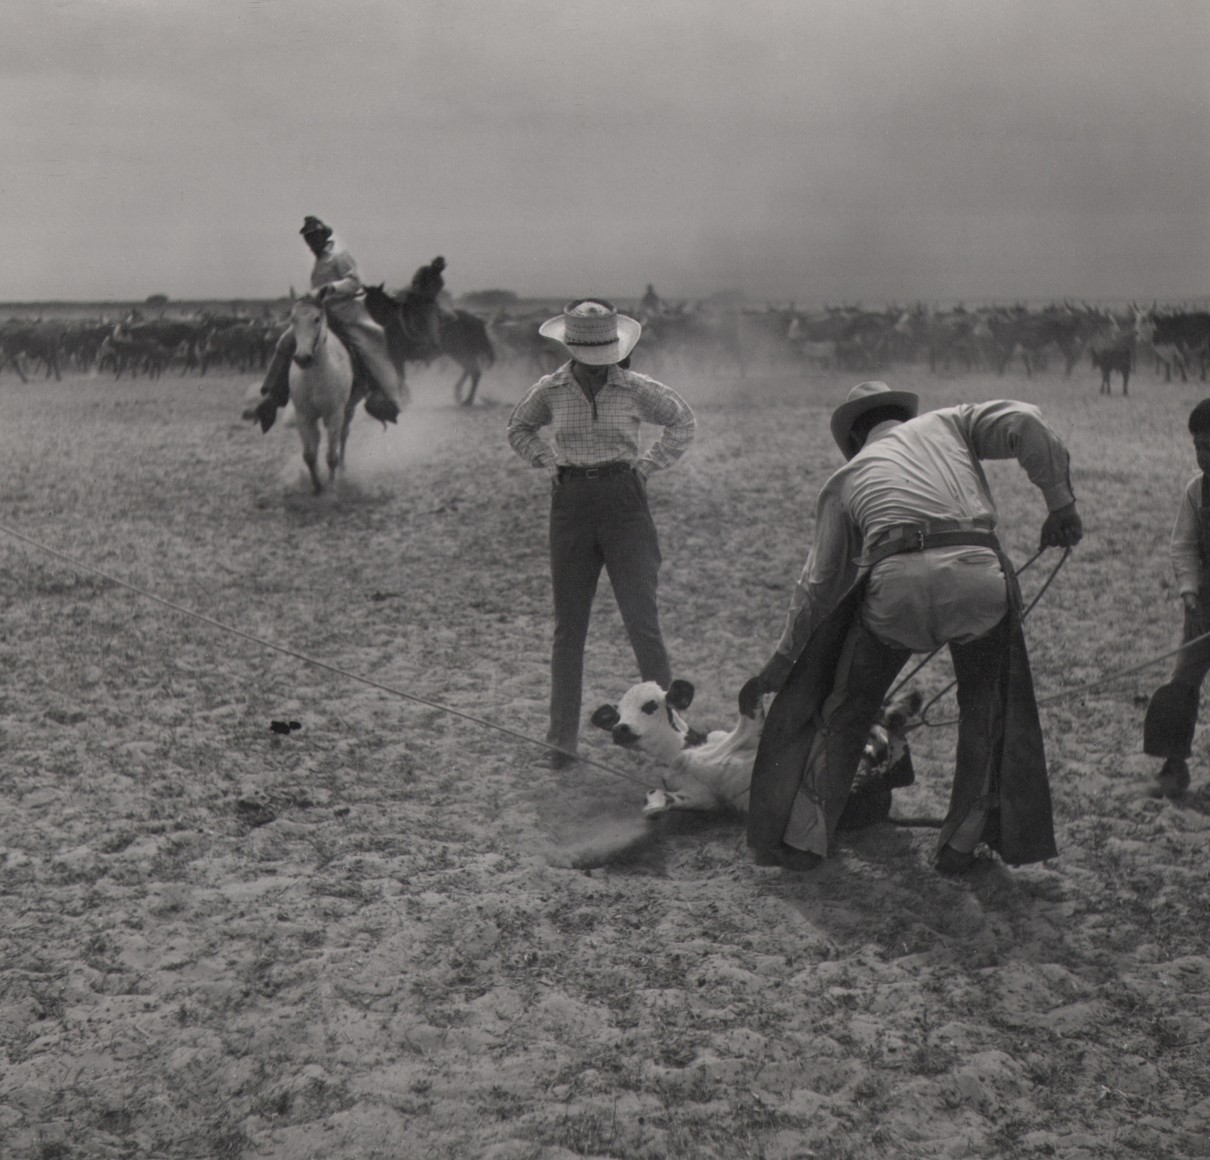 48. Toni Frissell, The King Ranch, 1939&ndash;1944. A cow calf being lassoed by two ranchers in the foreground right. Two figures ride horses in the background left.